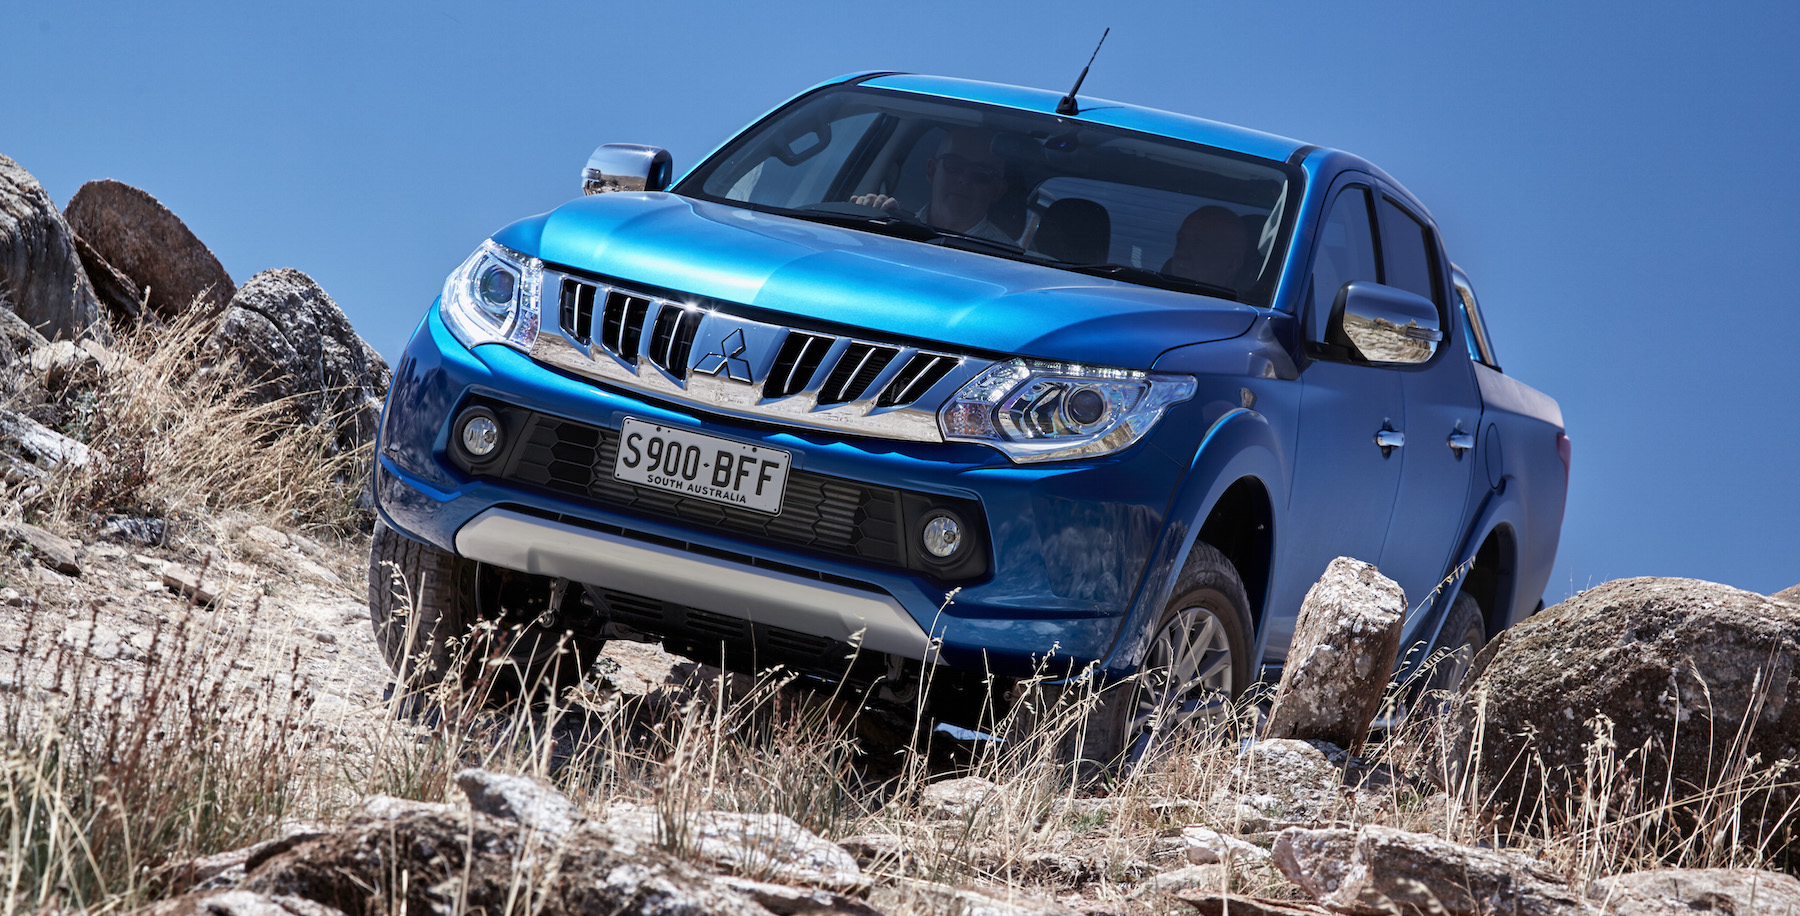 2016 Mitsubishi Triton pricing and specifications - photos | CarAdvice